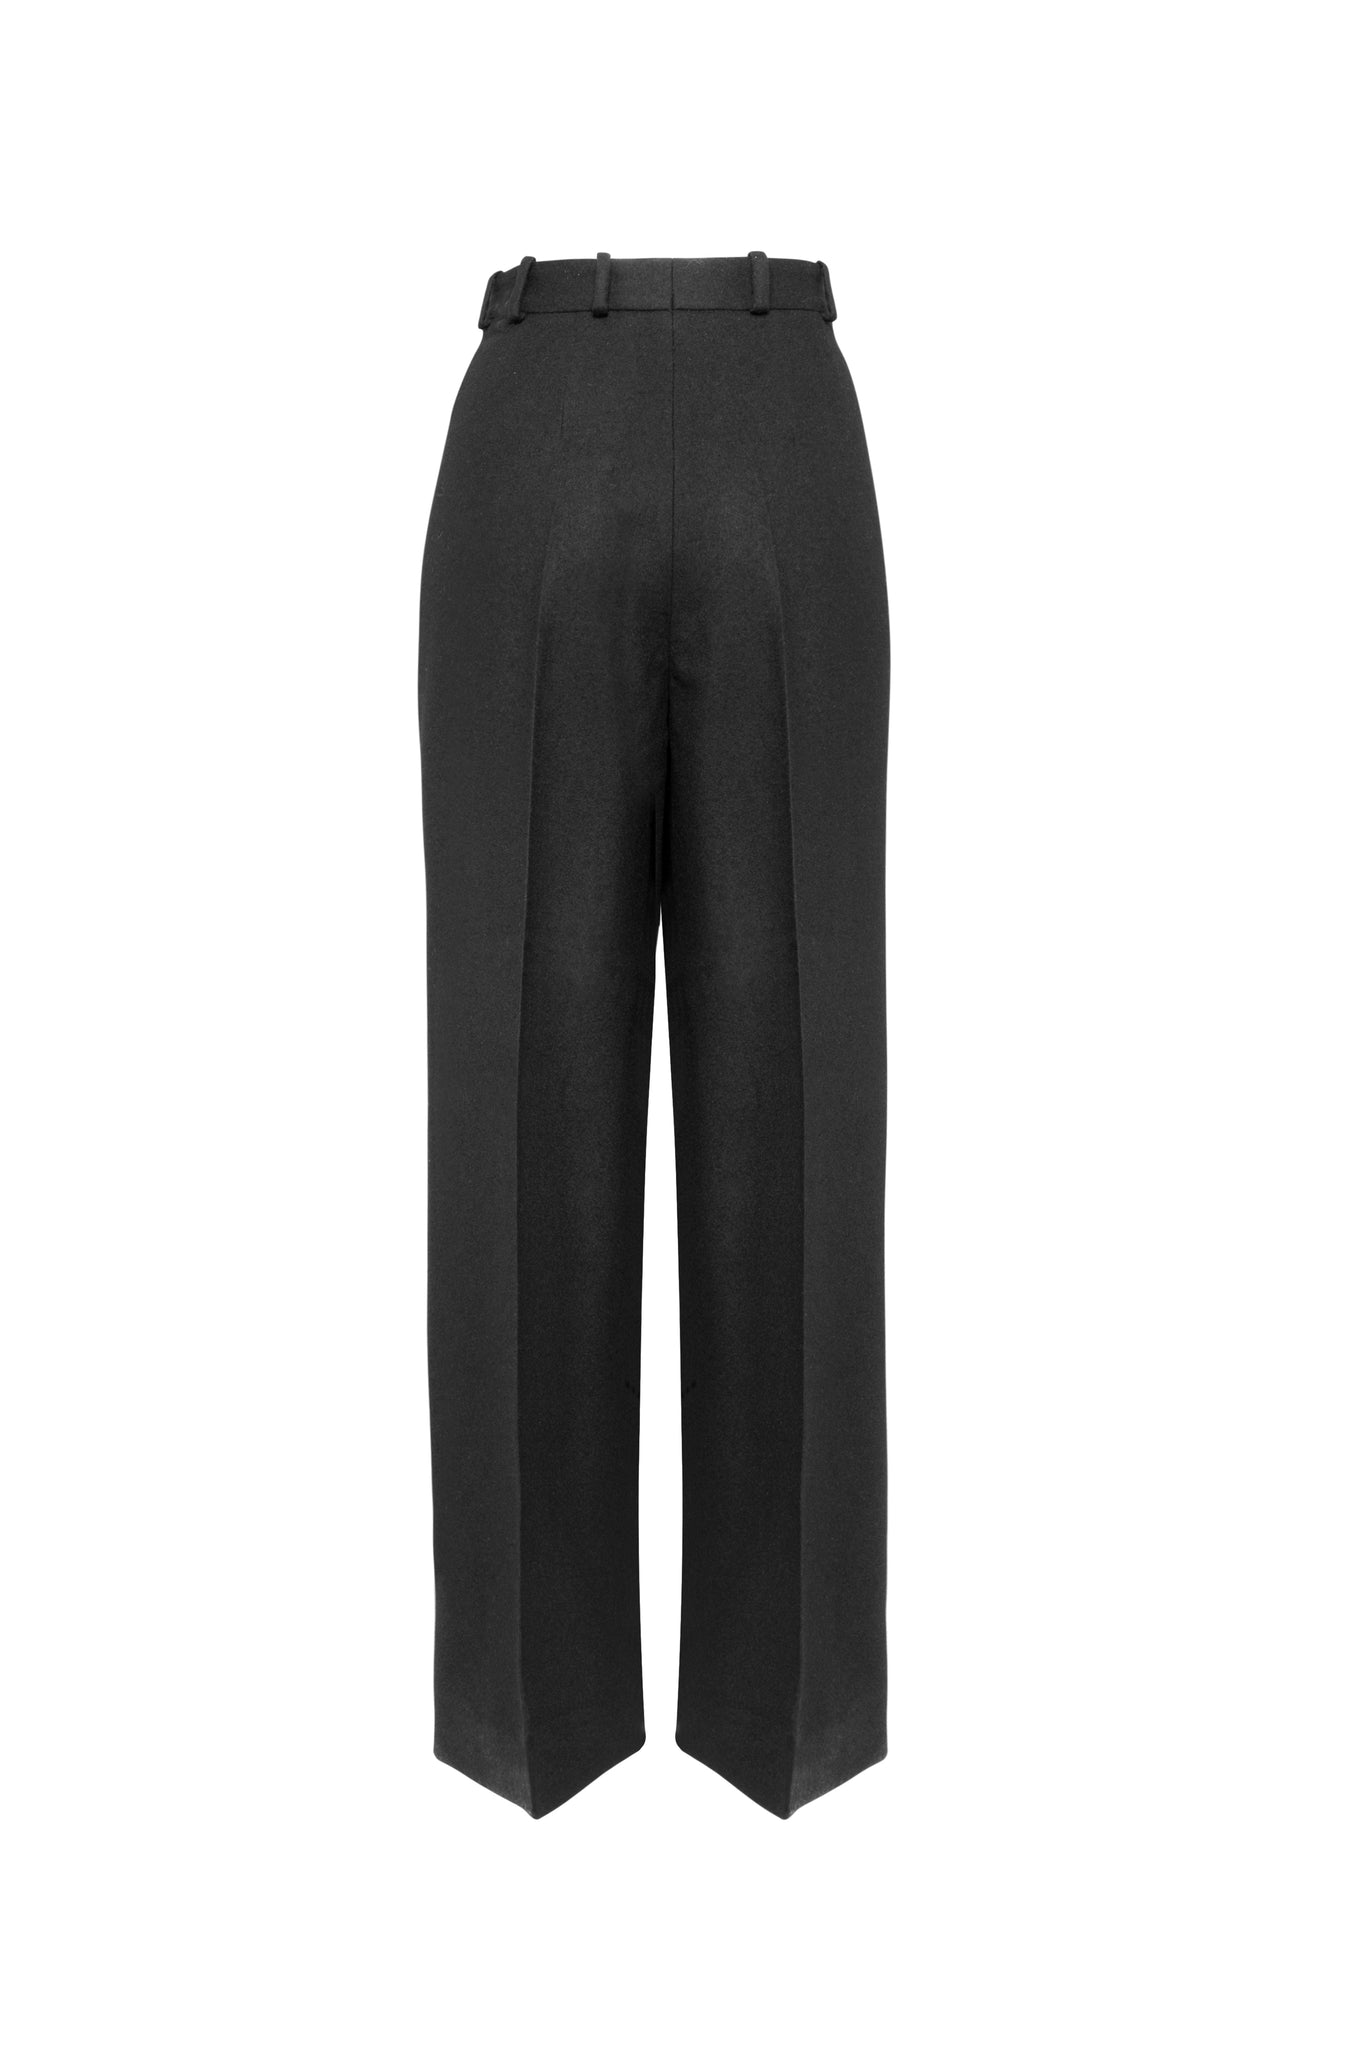 01/2 High Waisted Pants Wool in black - hello'ben store